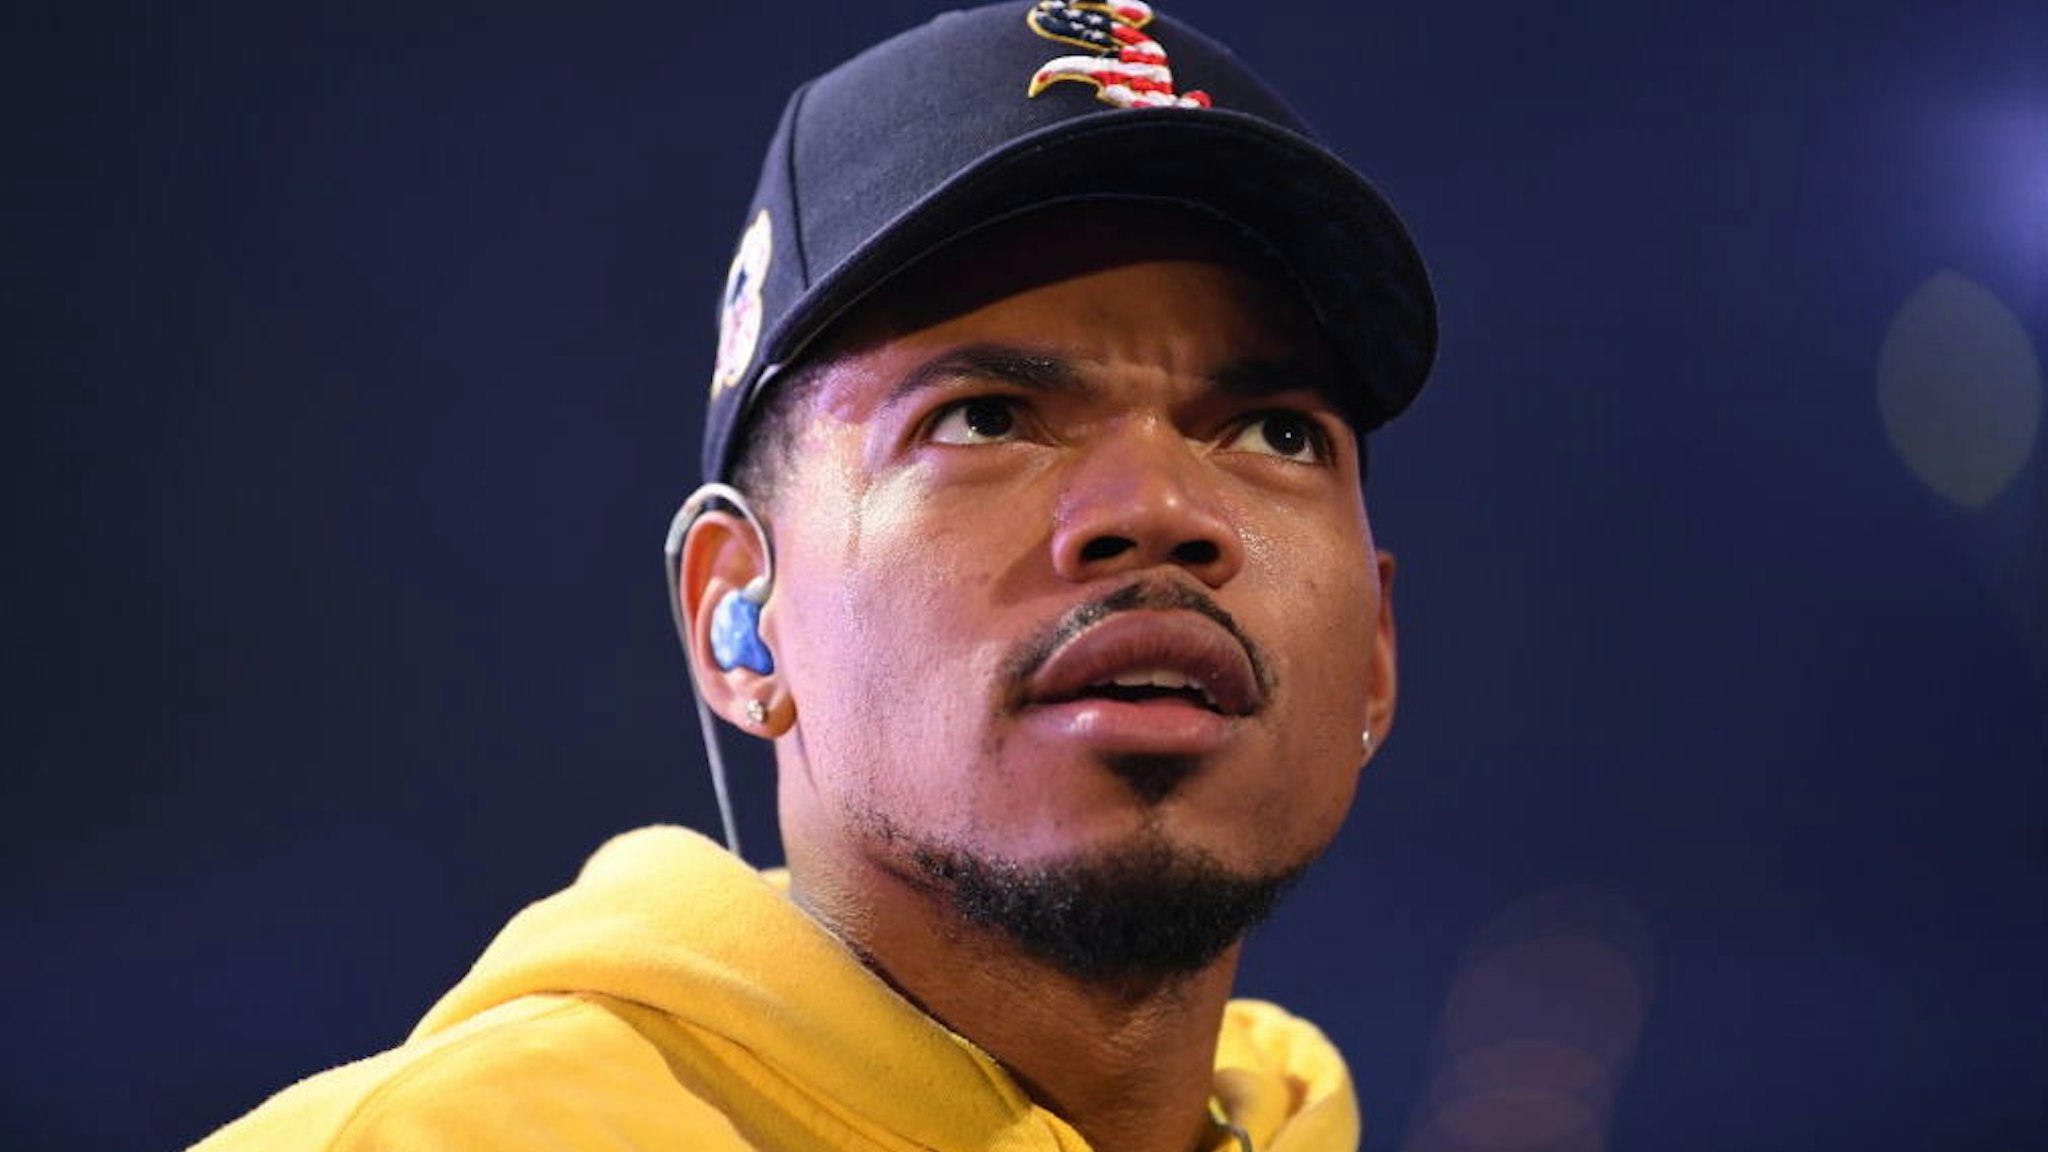 Chance the Rapper performs onstage during the 2019 iHeartRadio Music Festival at T-Mobile Arena on September 21, 2019 in Las Vegas, Nevada.